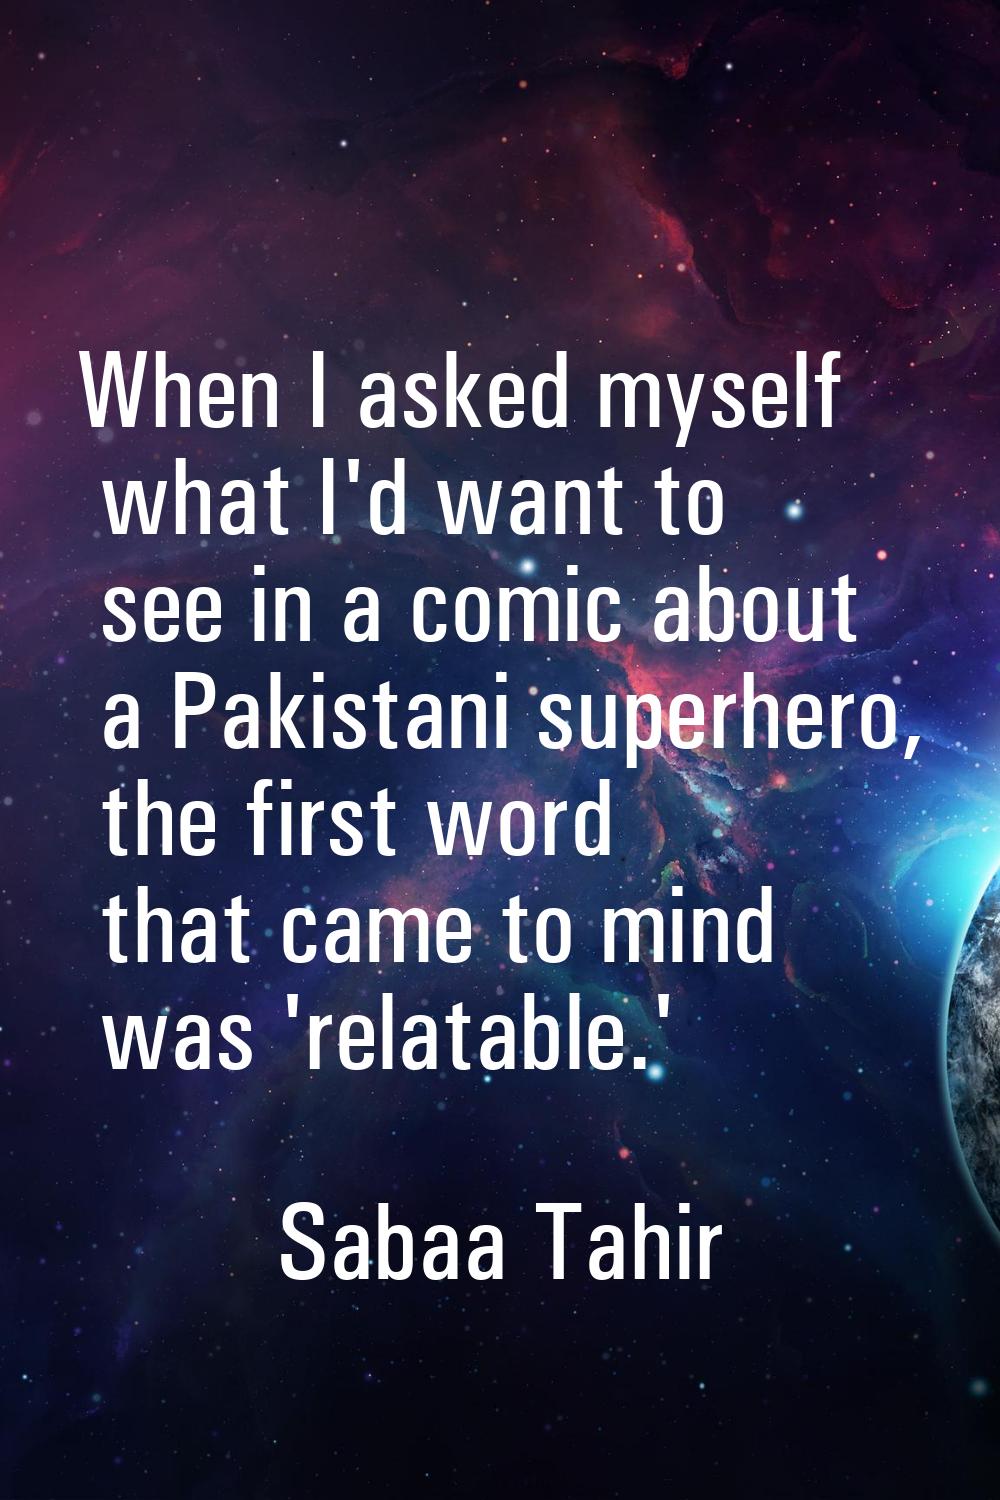 When I asked myself what I'd want to see in a comic about a Pakistani superhero, the first word tha